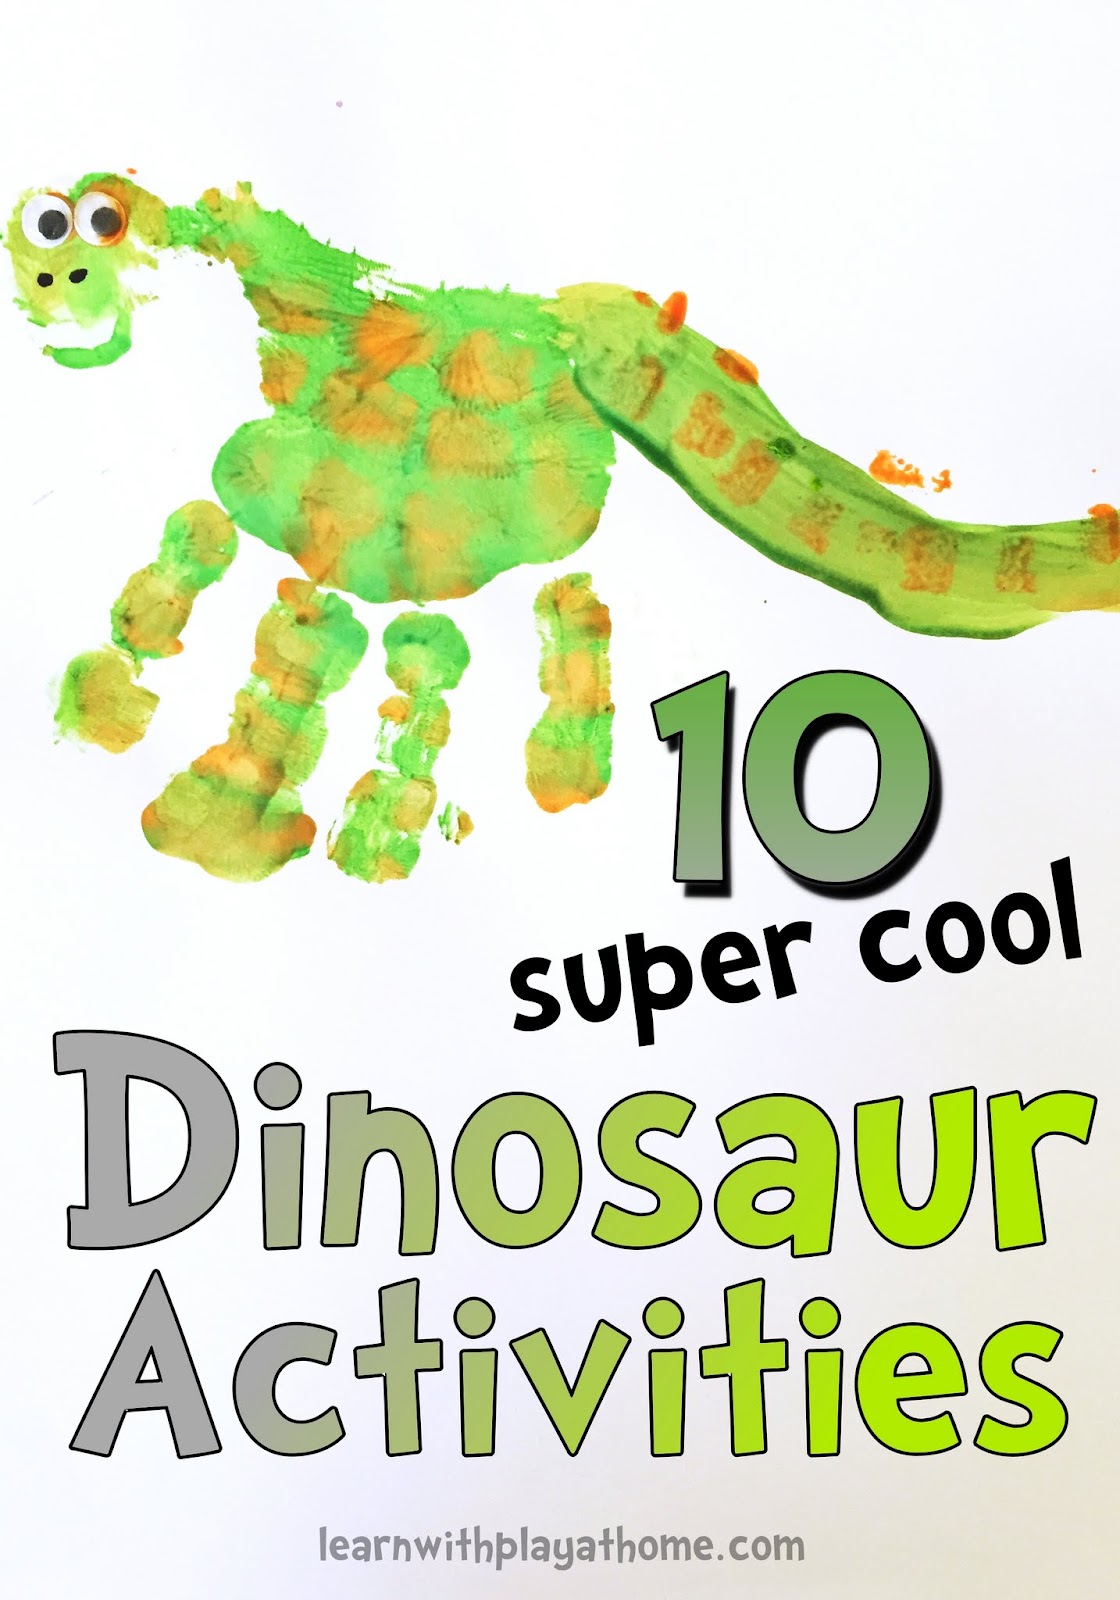 Learn with Play at Home: 10 Super Cool Dinosaur Activities